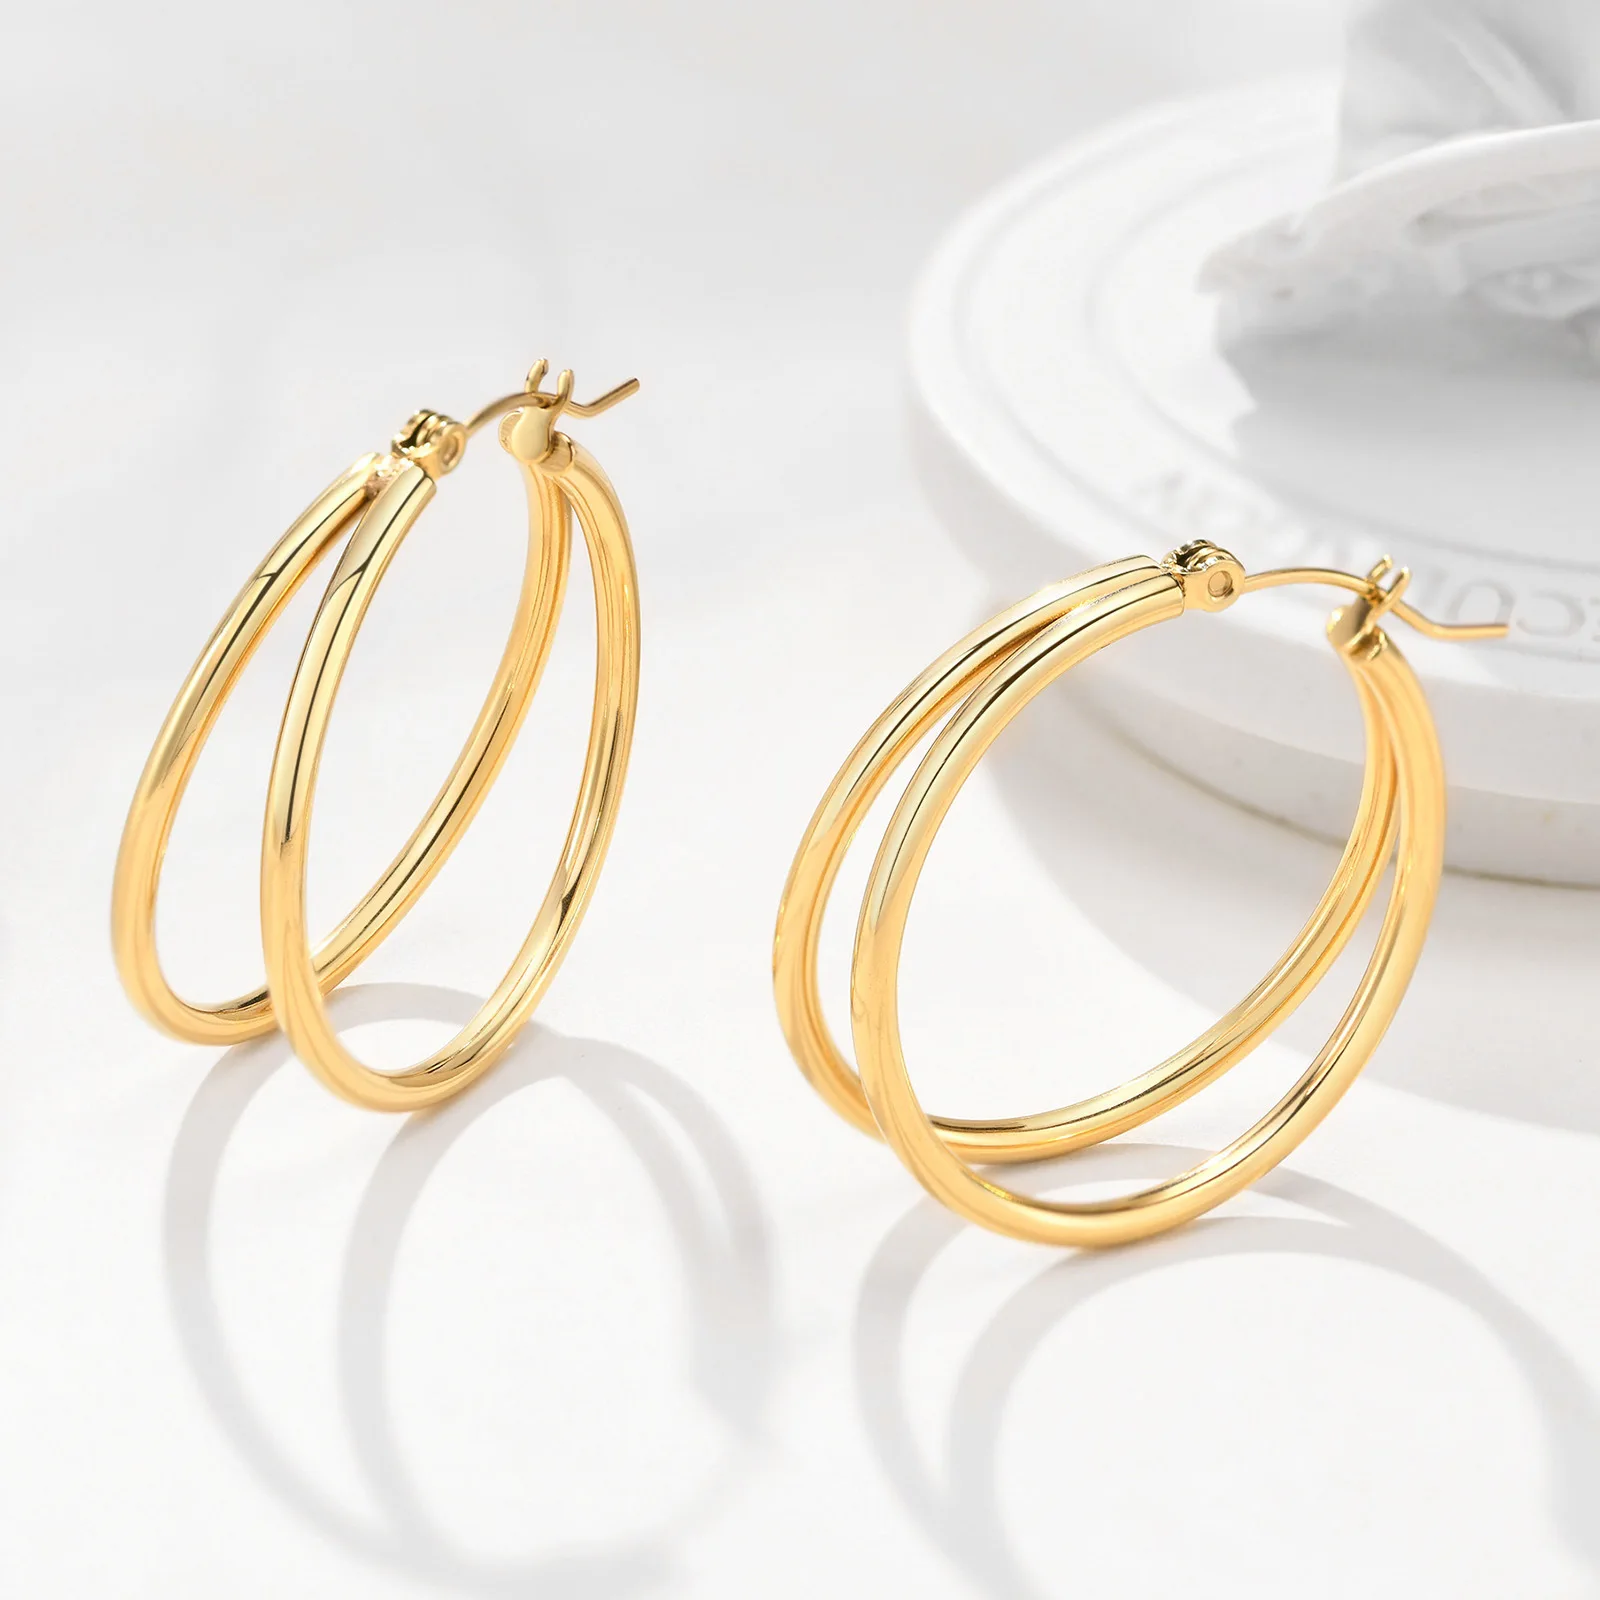 

32mm Double Circle Hollow Tube Earrings Stud Women Fashion Ear Jewelry 18K Gold Plated Stainless Steel Hoop Earrings (KSS381), Same as the picture